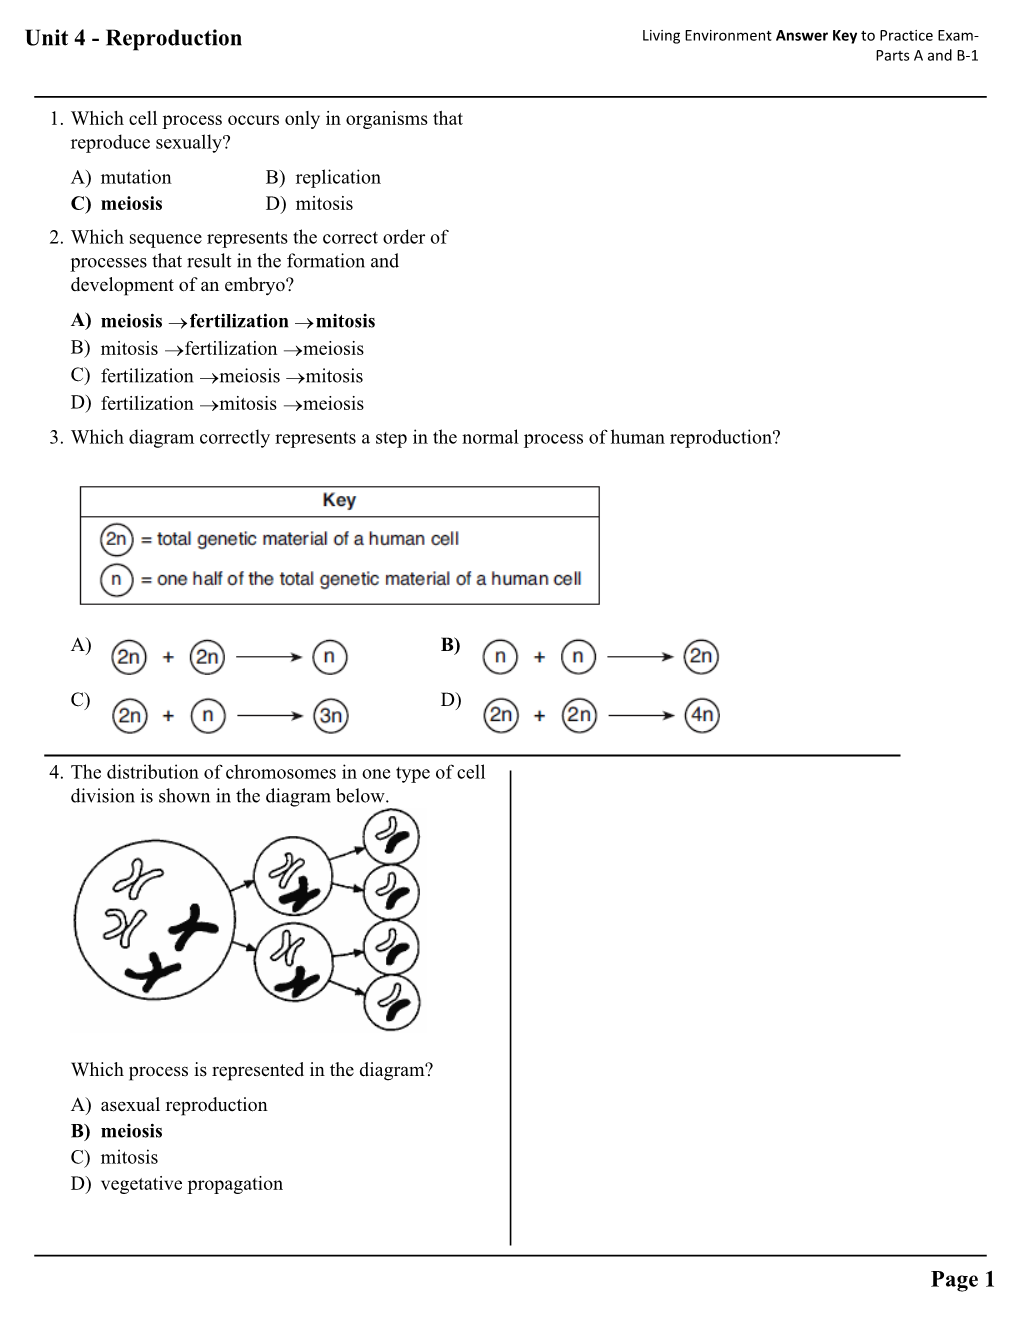 Unit 4 - Reproduction Living Environment Answer Key to Practice Exam- Parts a and B-1